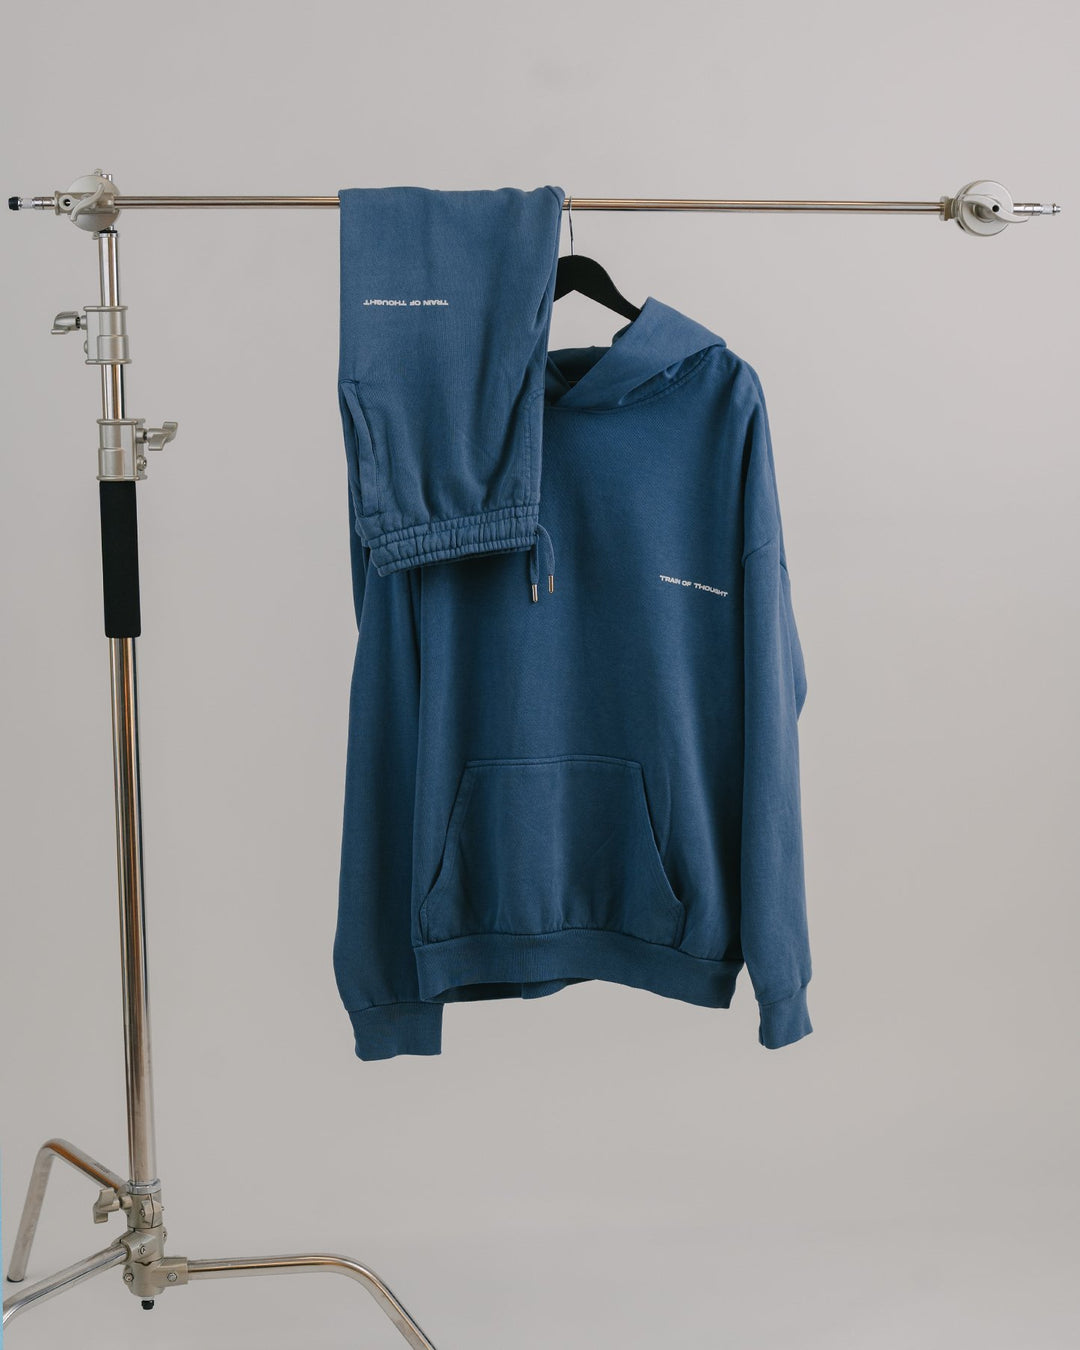 Necessary Lounge Pebble Blue Sweatpants - trainofthoughtcollective